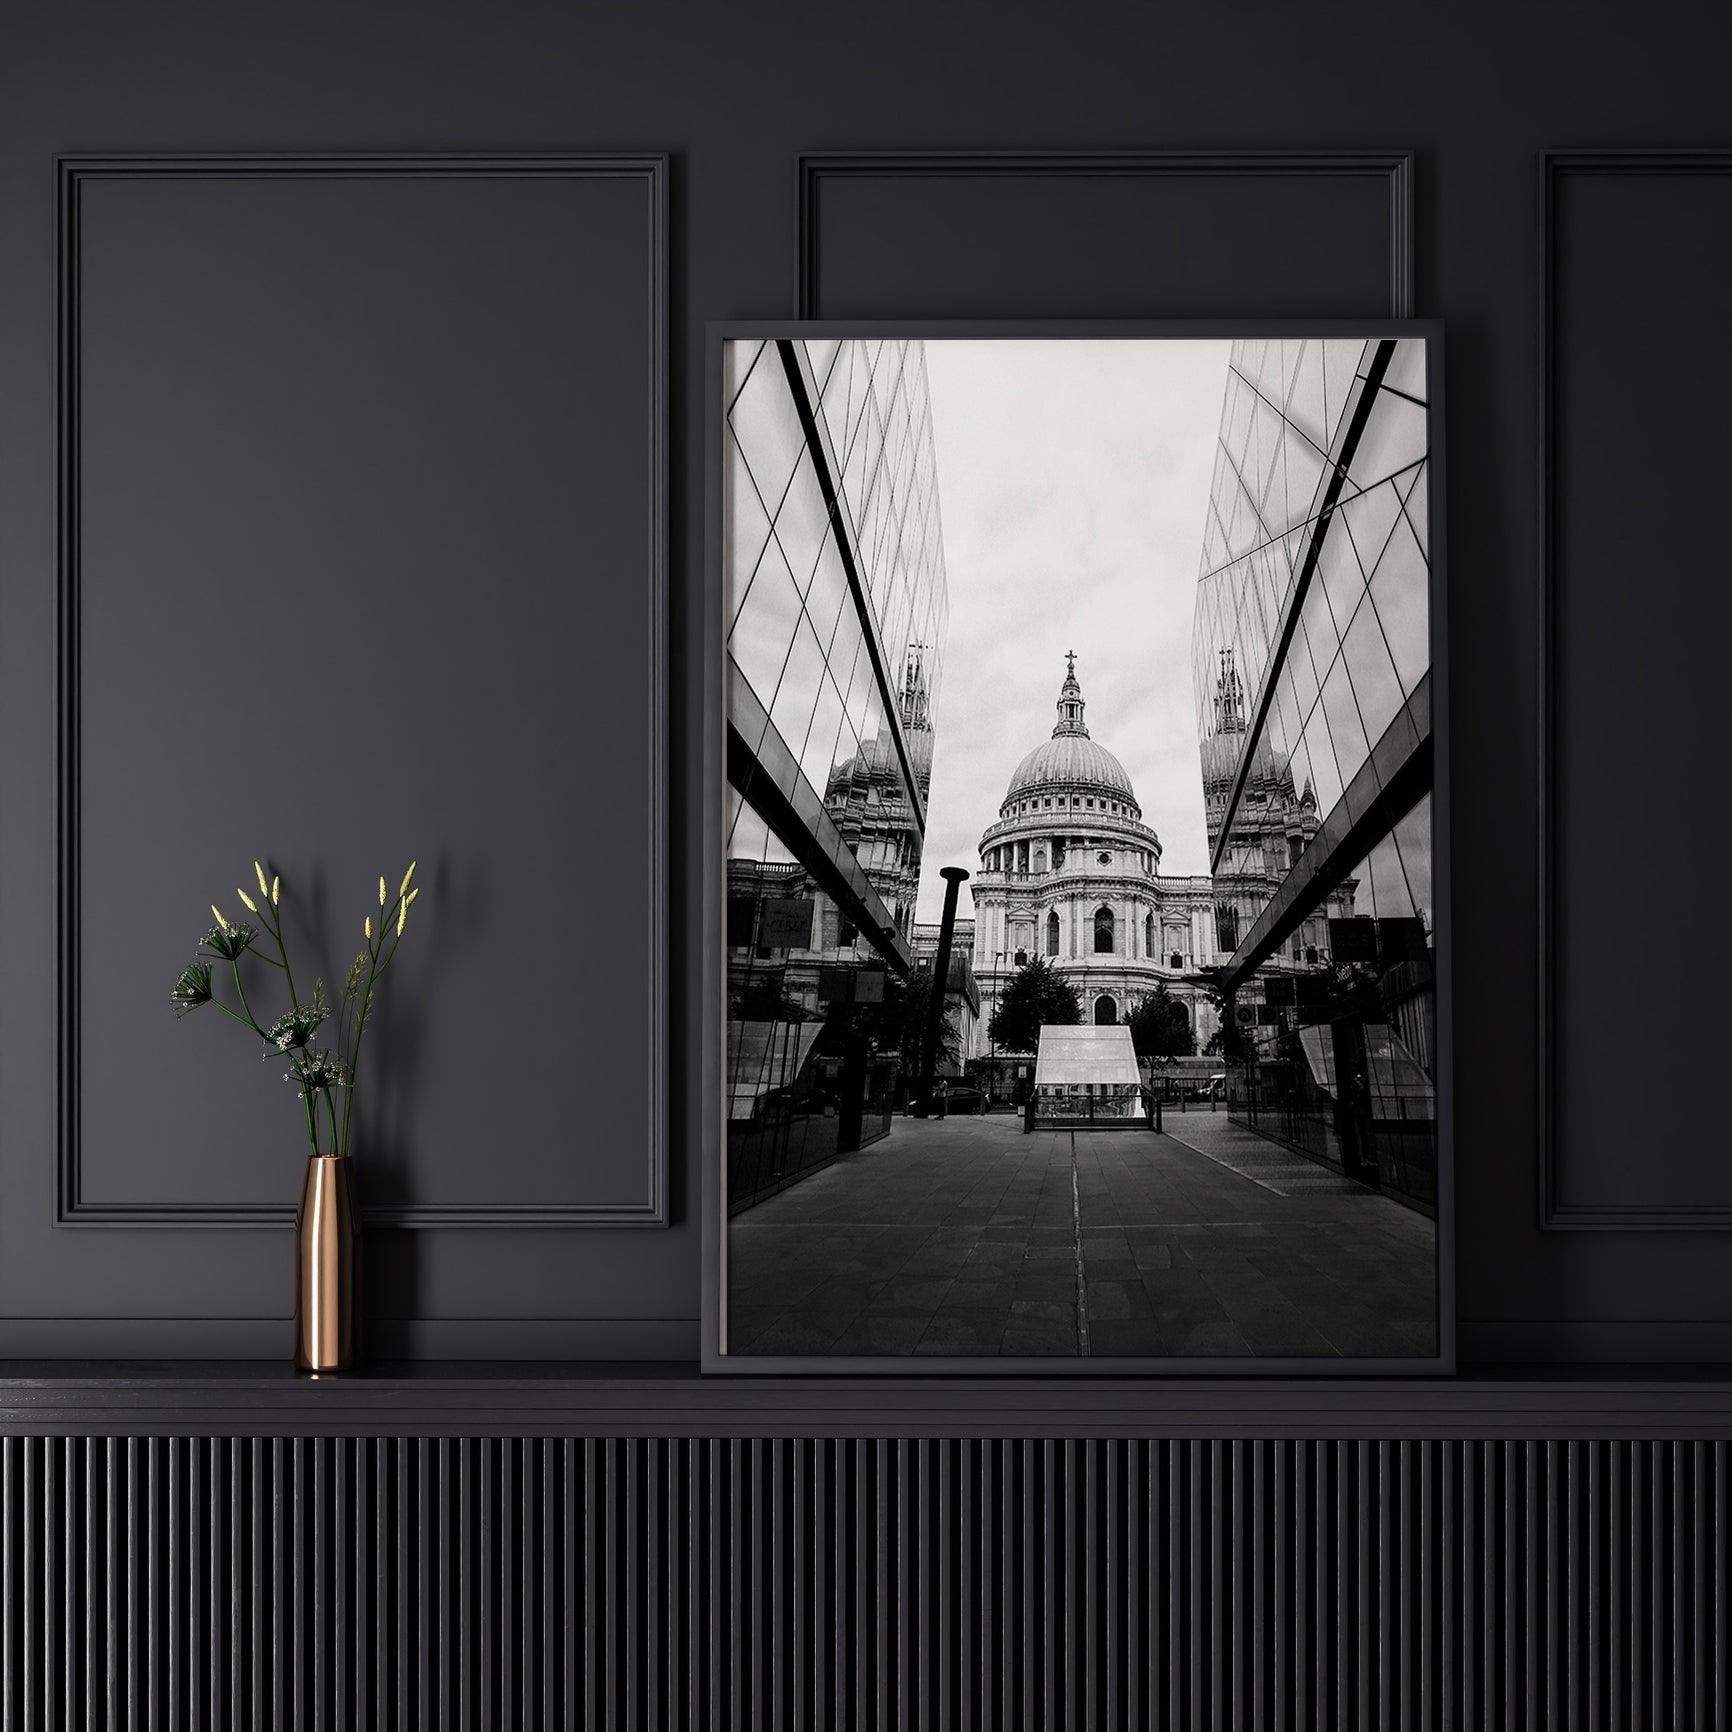 B&W St. Paul's Cathedral III | London Print - Departures Print Shop